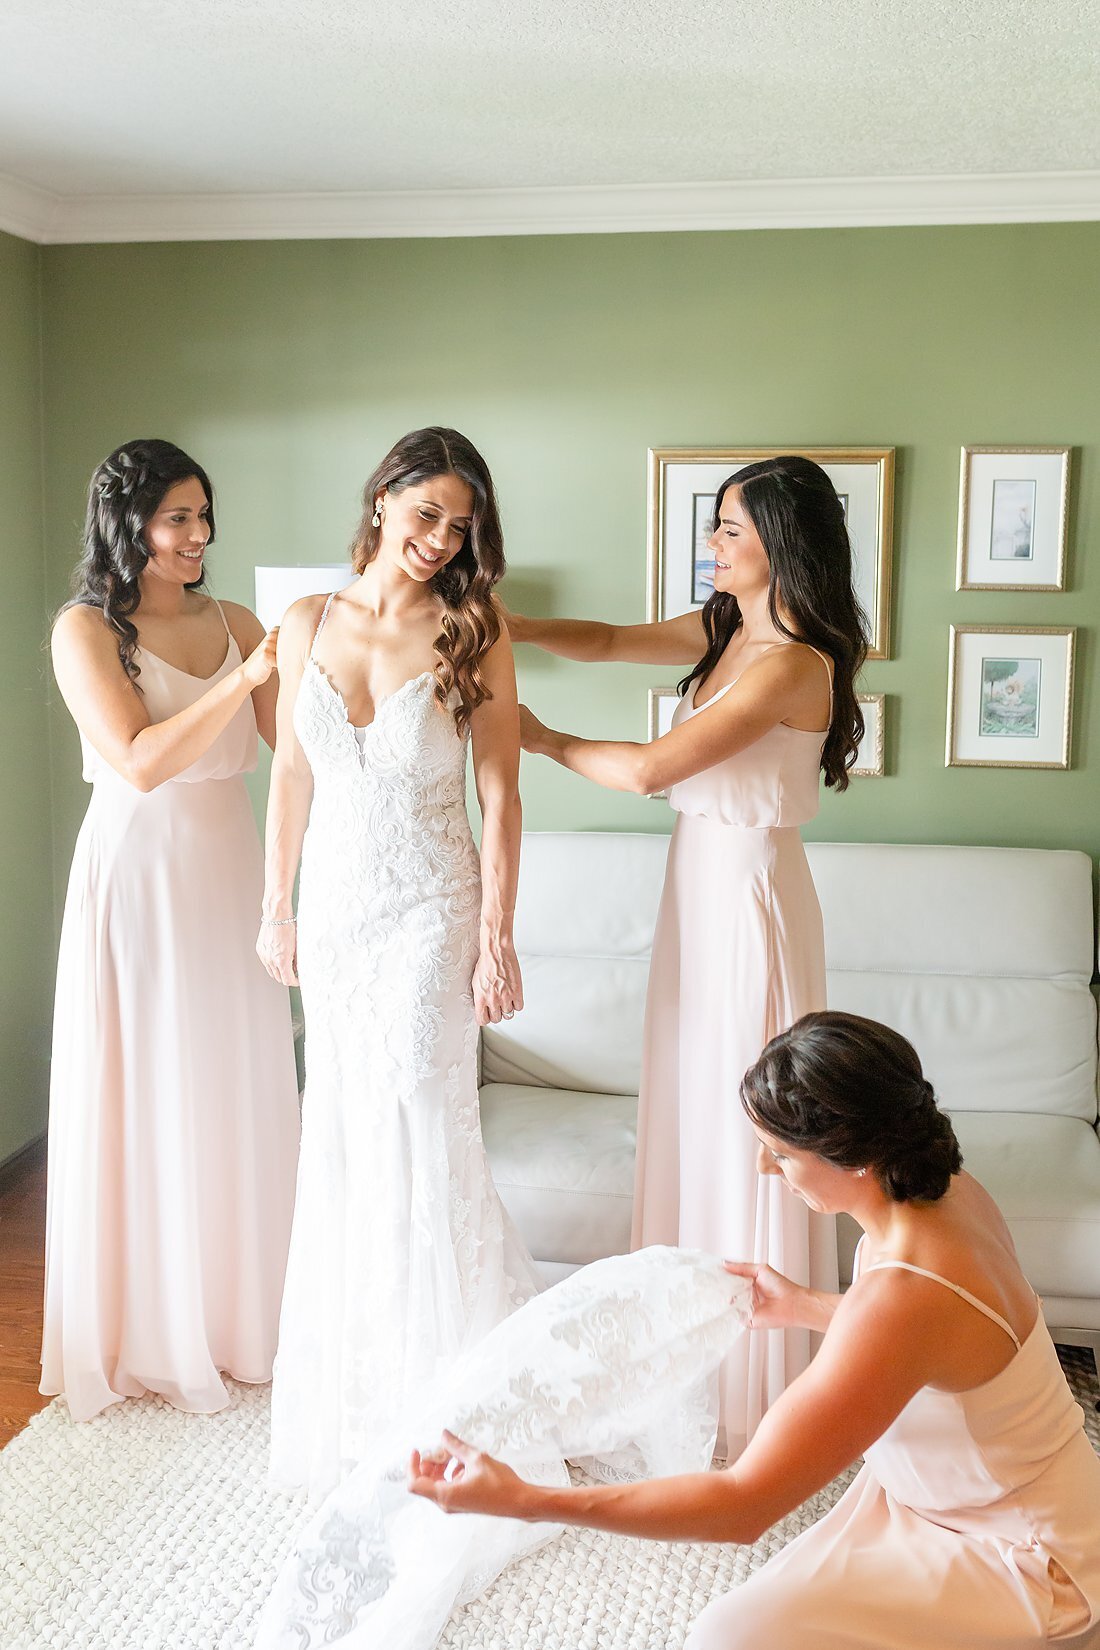 Bridesmaids-helping-the-bride-getting-ready-for-her-wedding-day